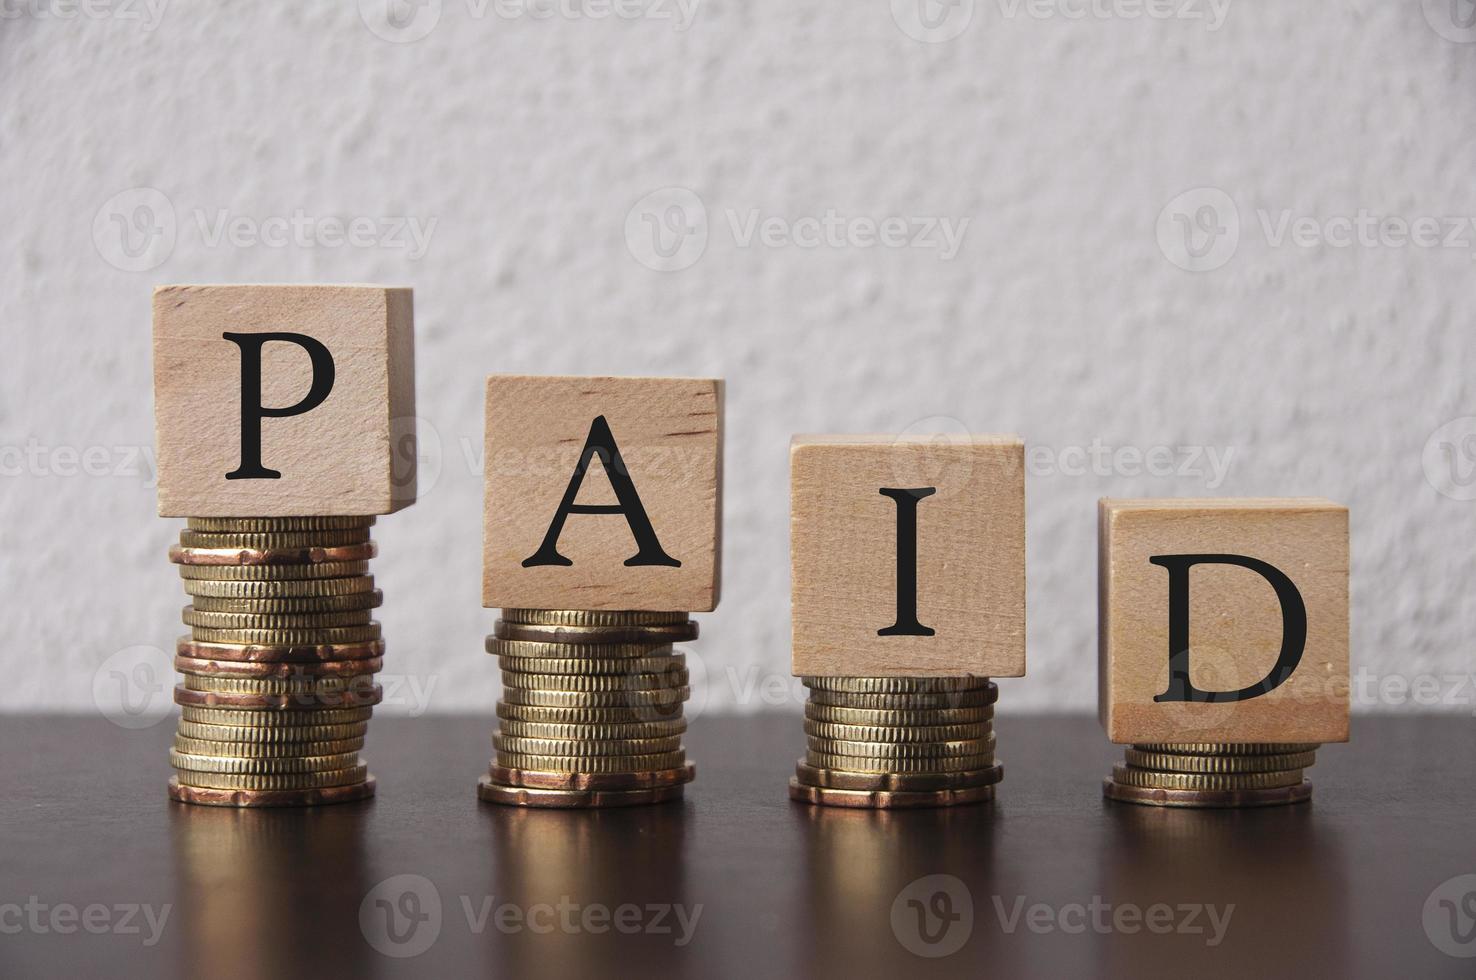 Coins Stack with paid text on wooden blocks - Financial Concept photo